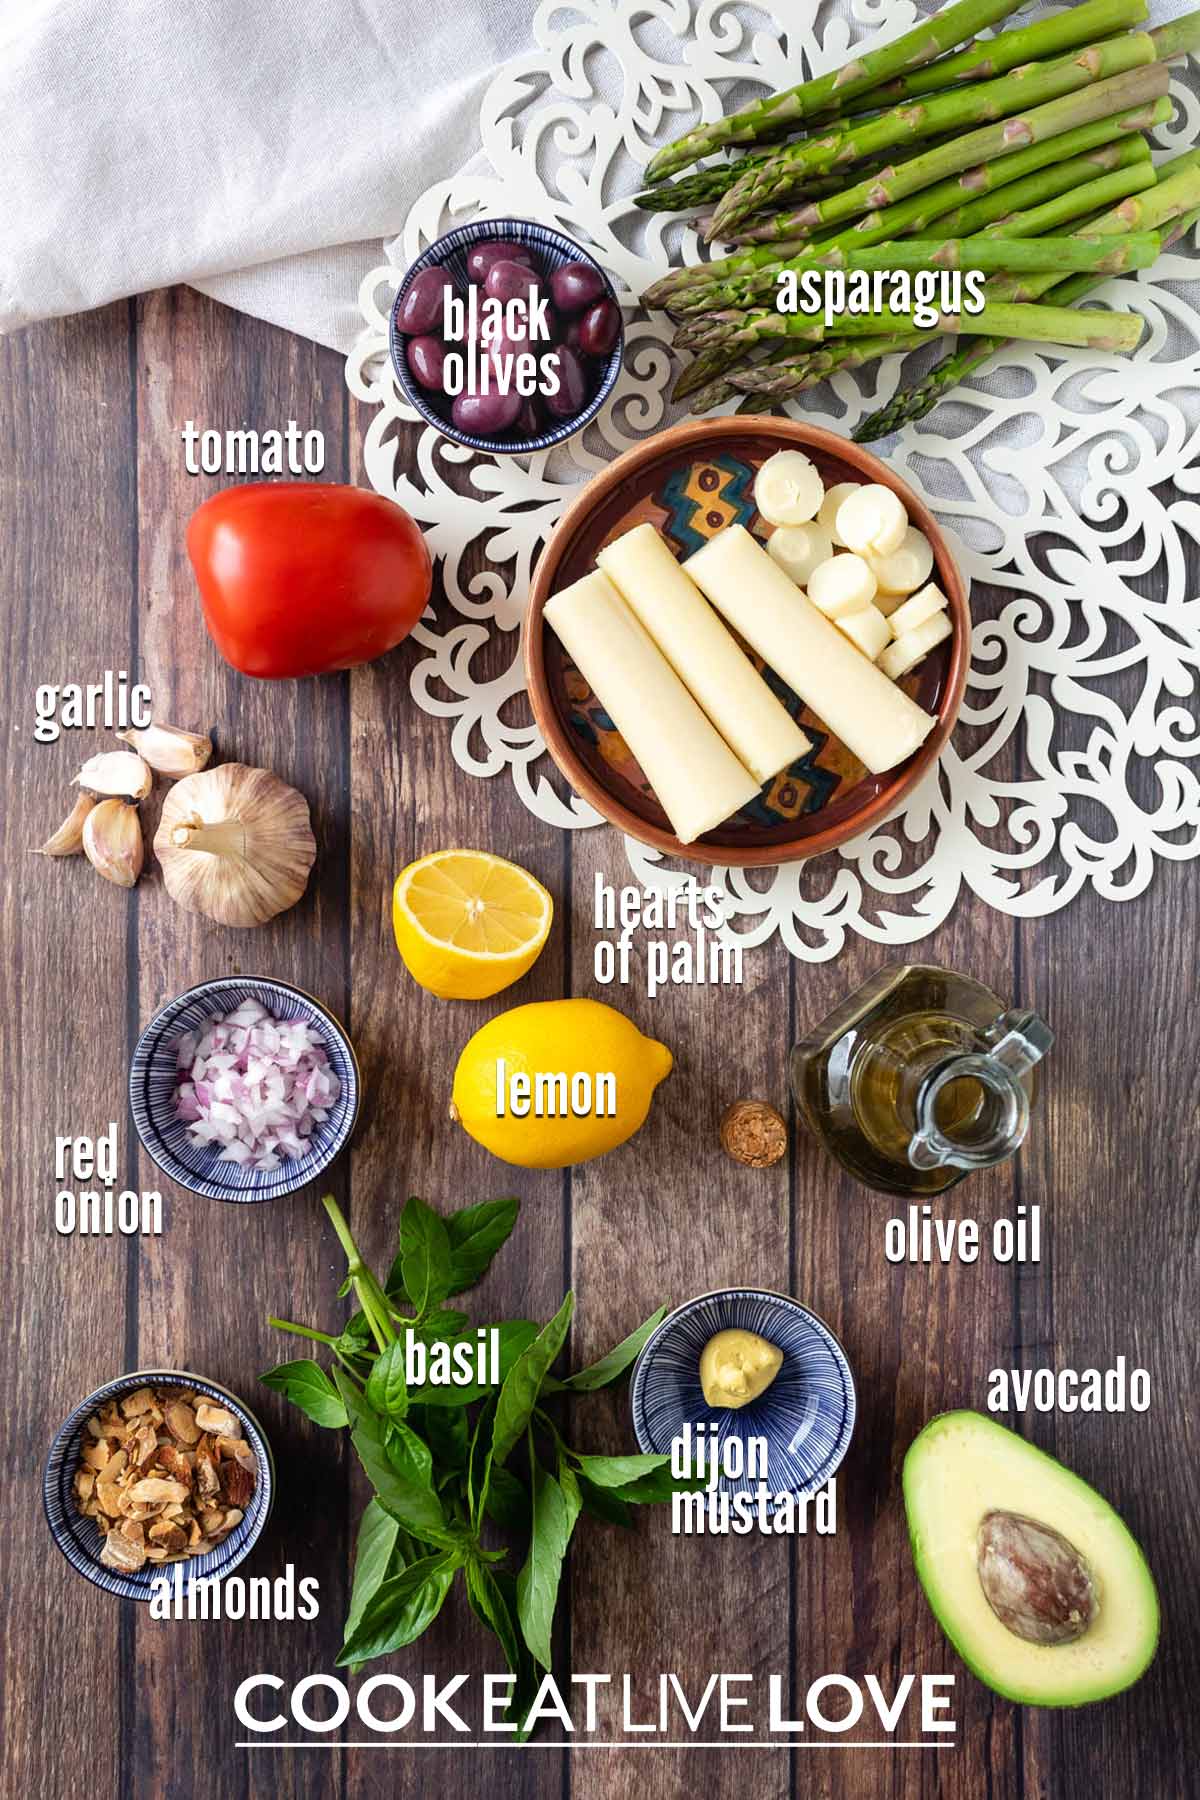 Ingredients to make hearts of palm salad.